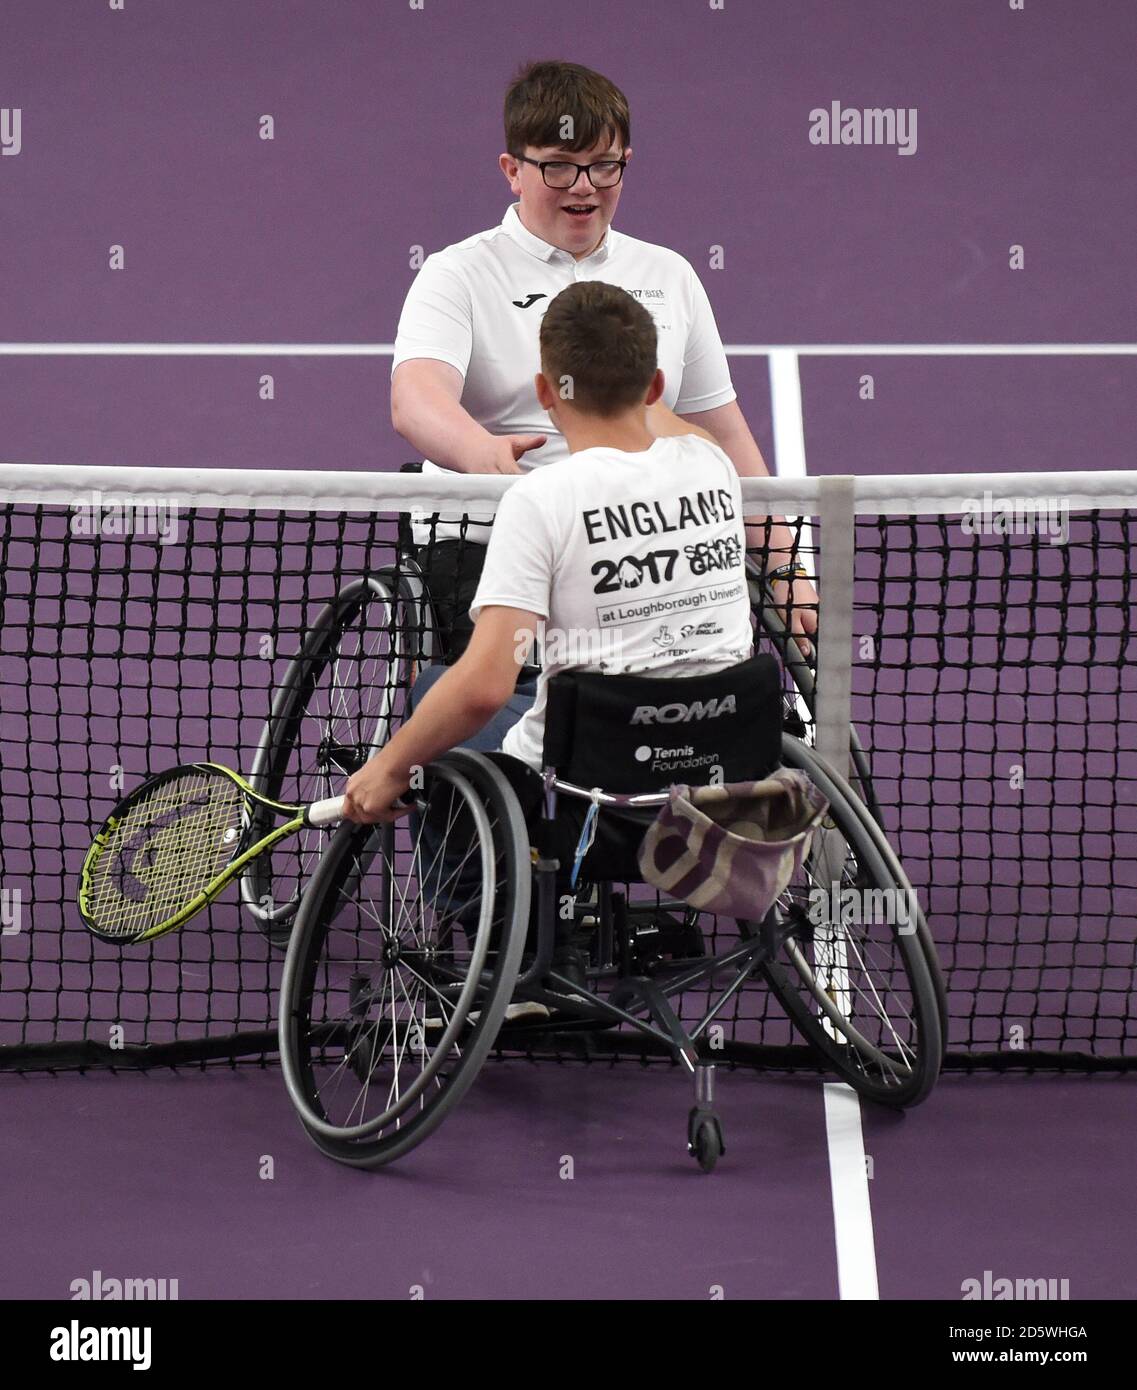 England's Diarmuid Murphy and England's Lewis Evans shake hands during the  Wheelchair tennis Competition during the 2017 School Games Stock Photo -  Alamy